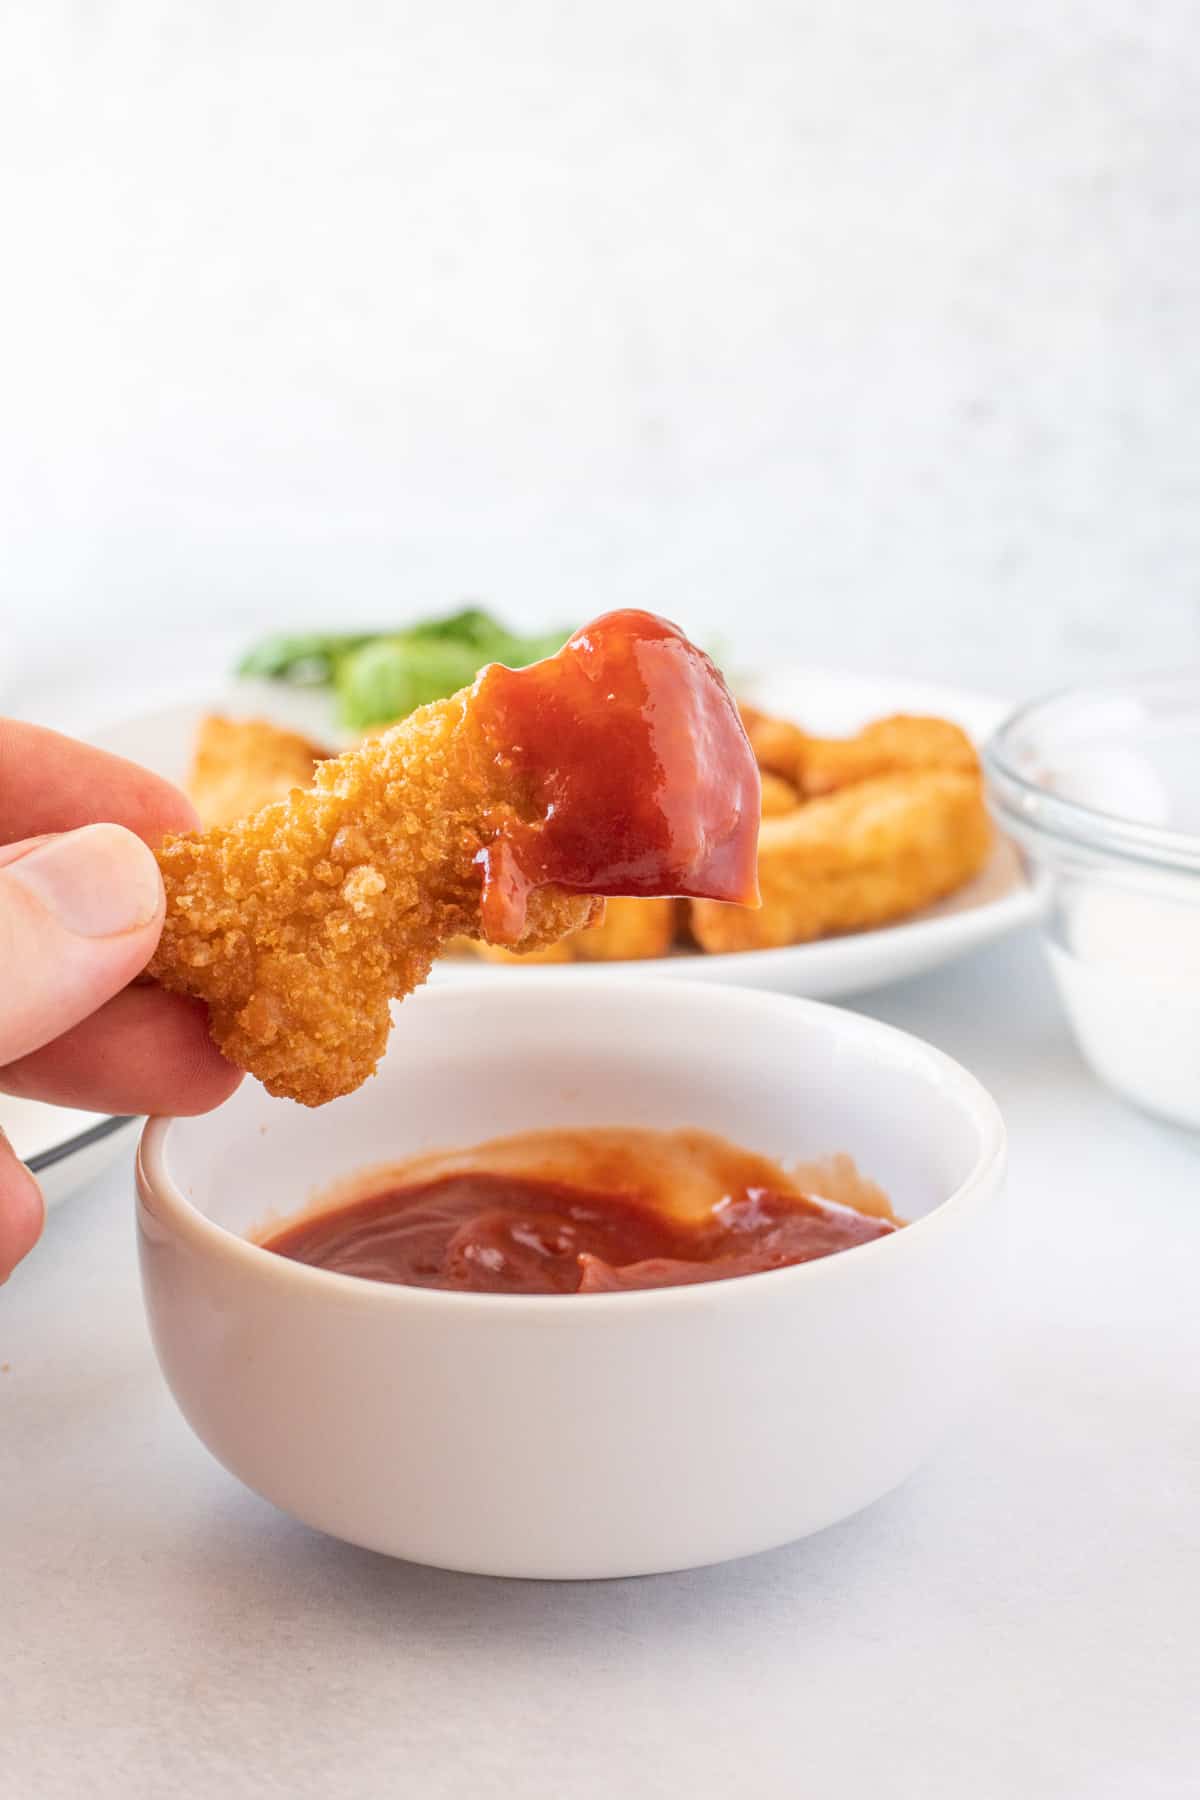 dino nugget dipped in ketchup.